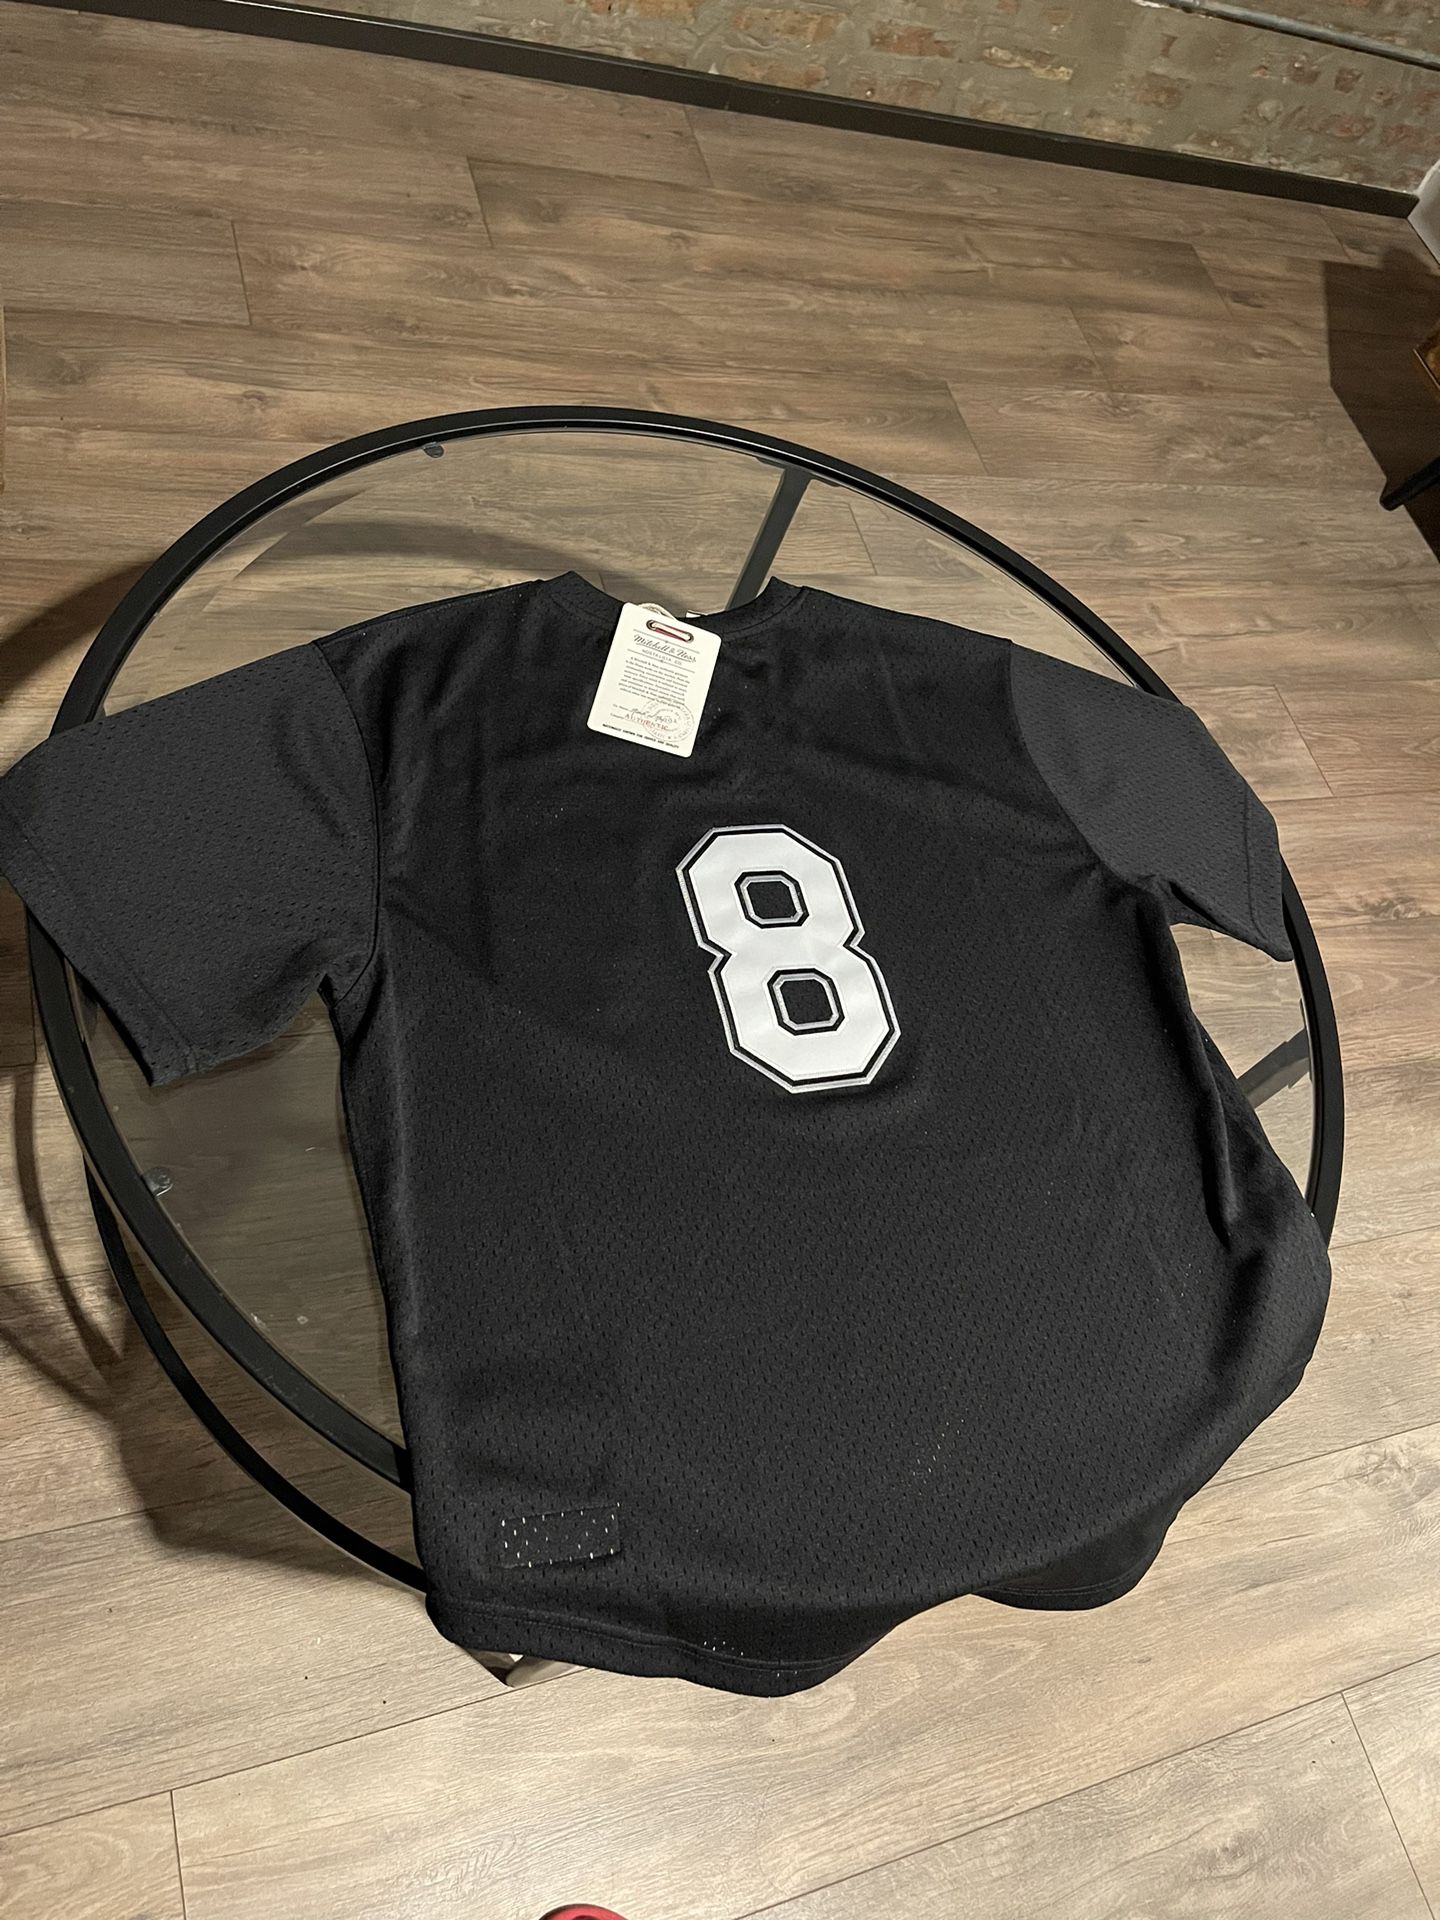 Chicago White Sox Southside Anderson Jersey M L XL XXL 3XL for Sale in  Franklin Park, IL - OfferUp